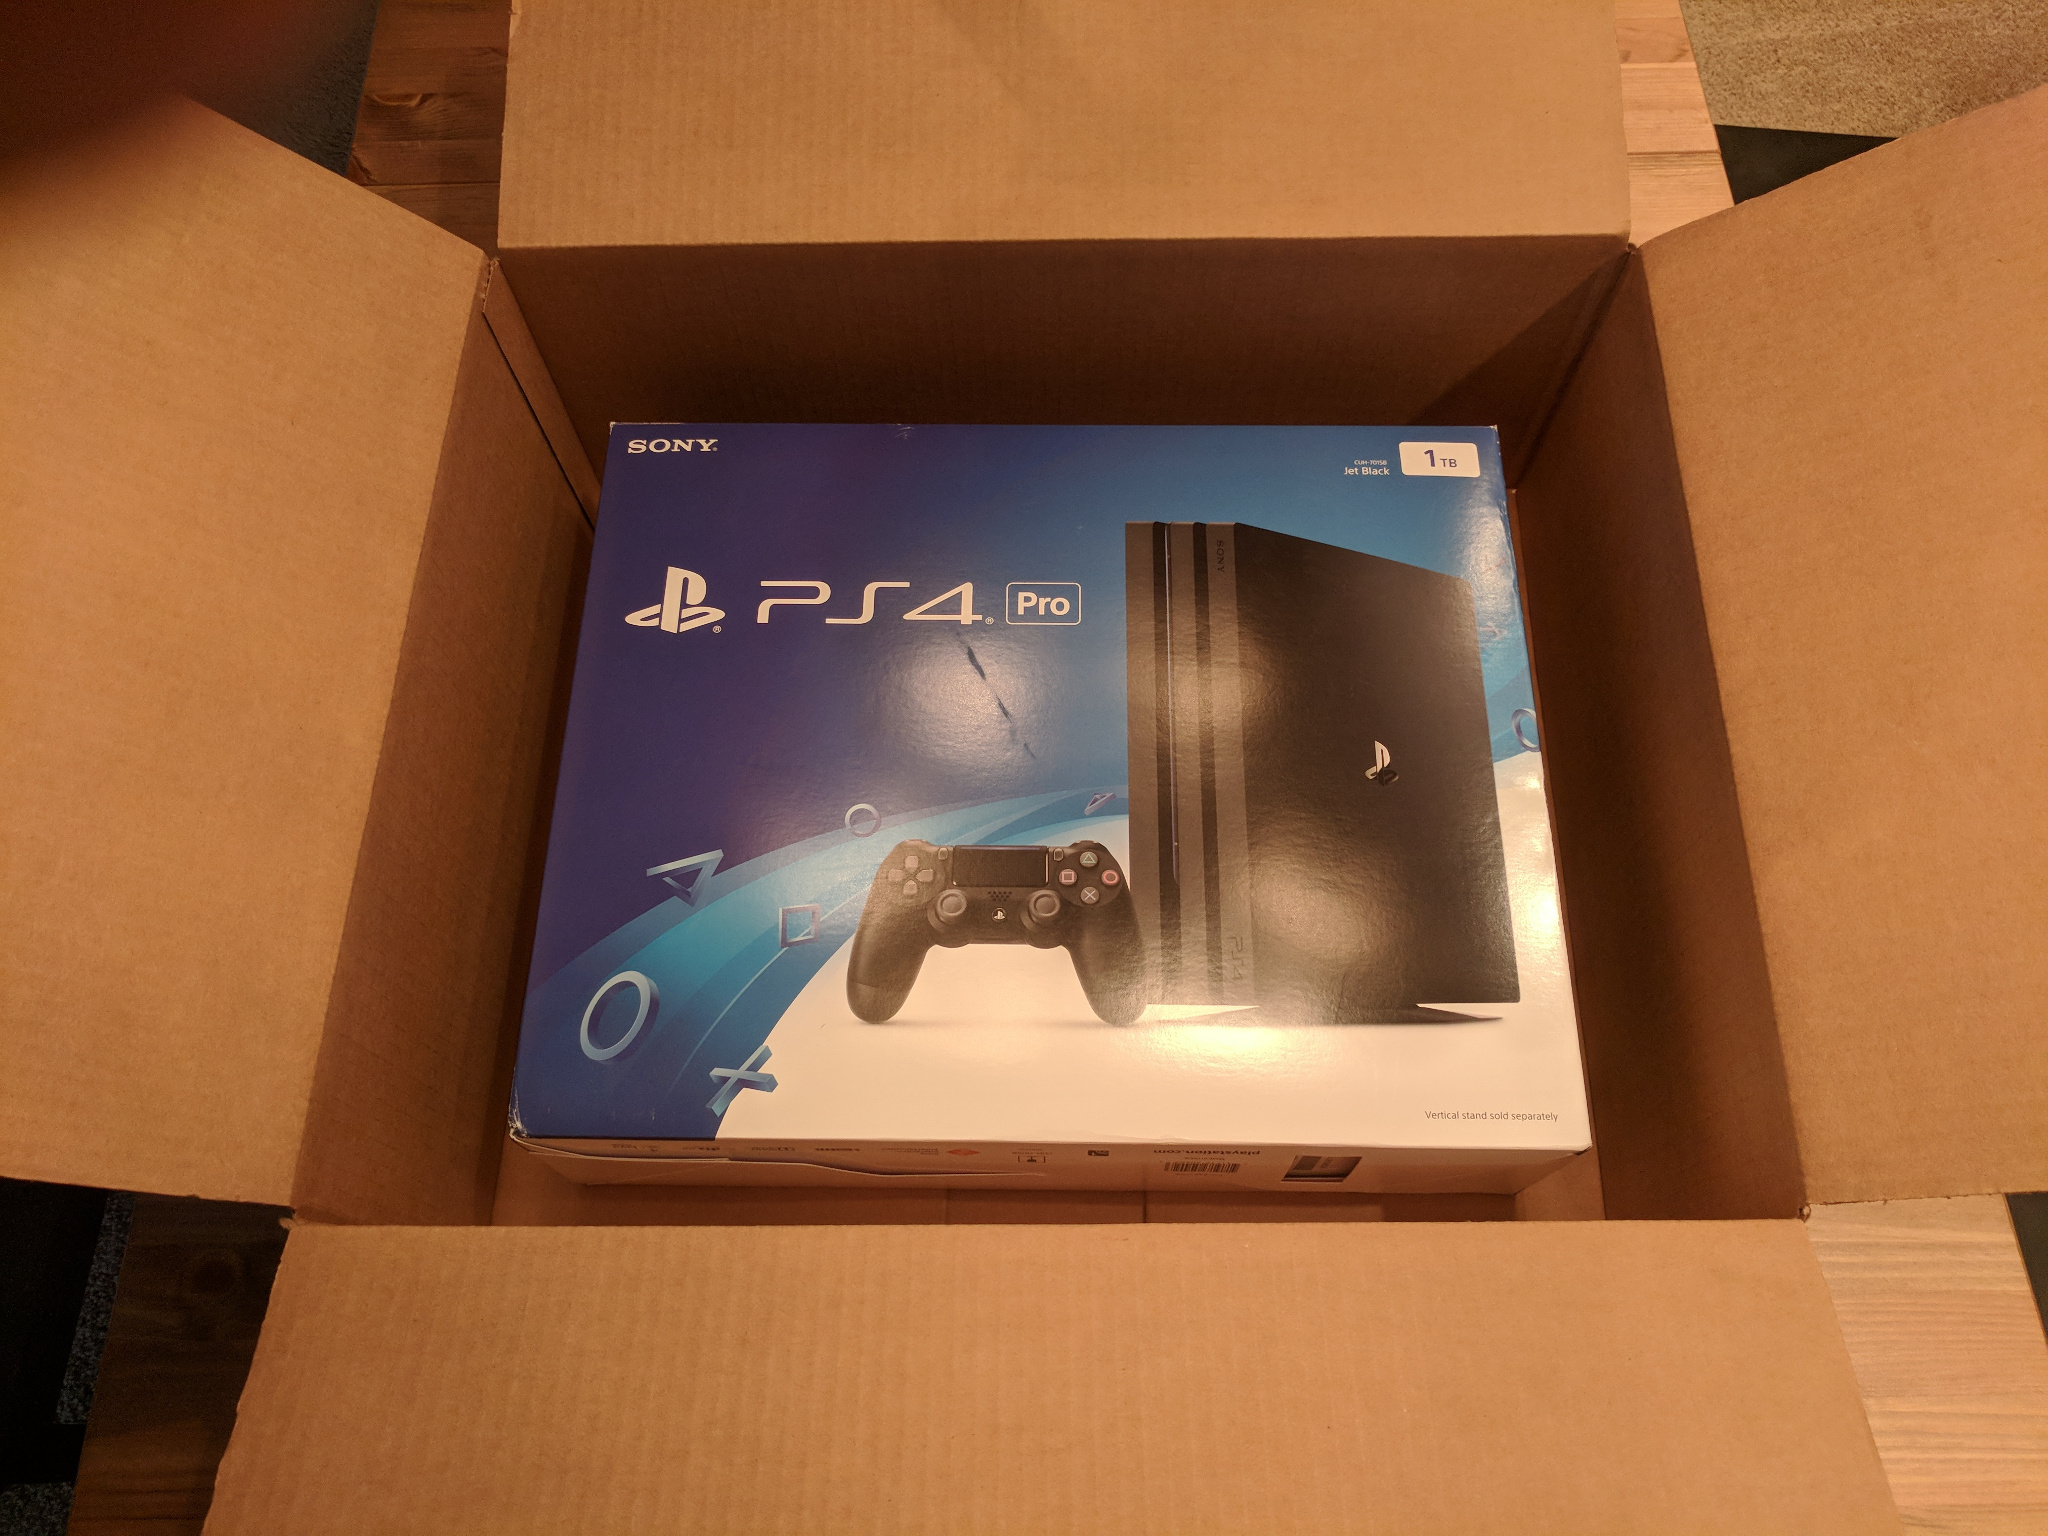 The best way to ship your PlayStation 4